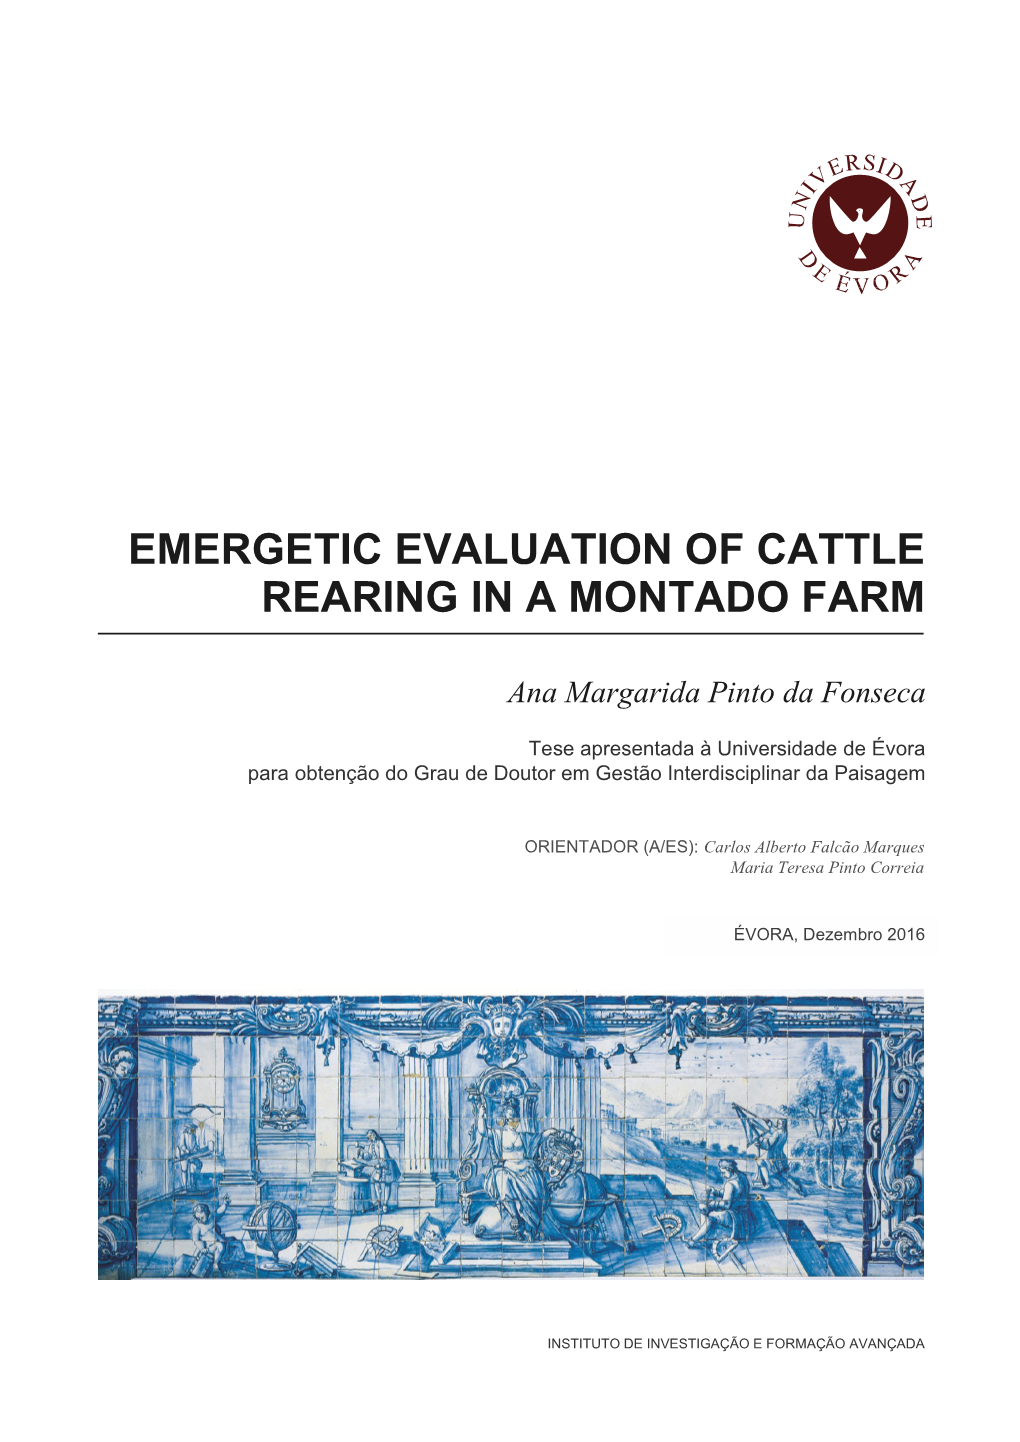 Emergetic Evaluation of Cattle Rearing in a Montado Farm